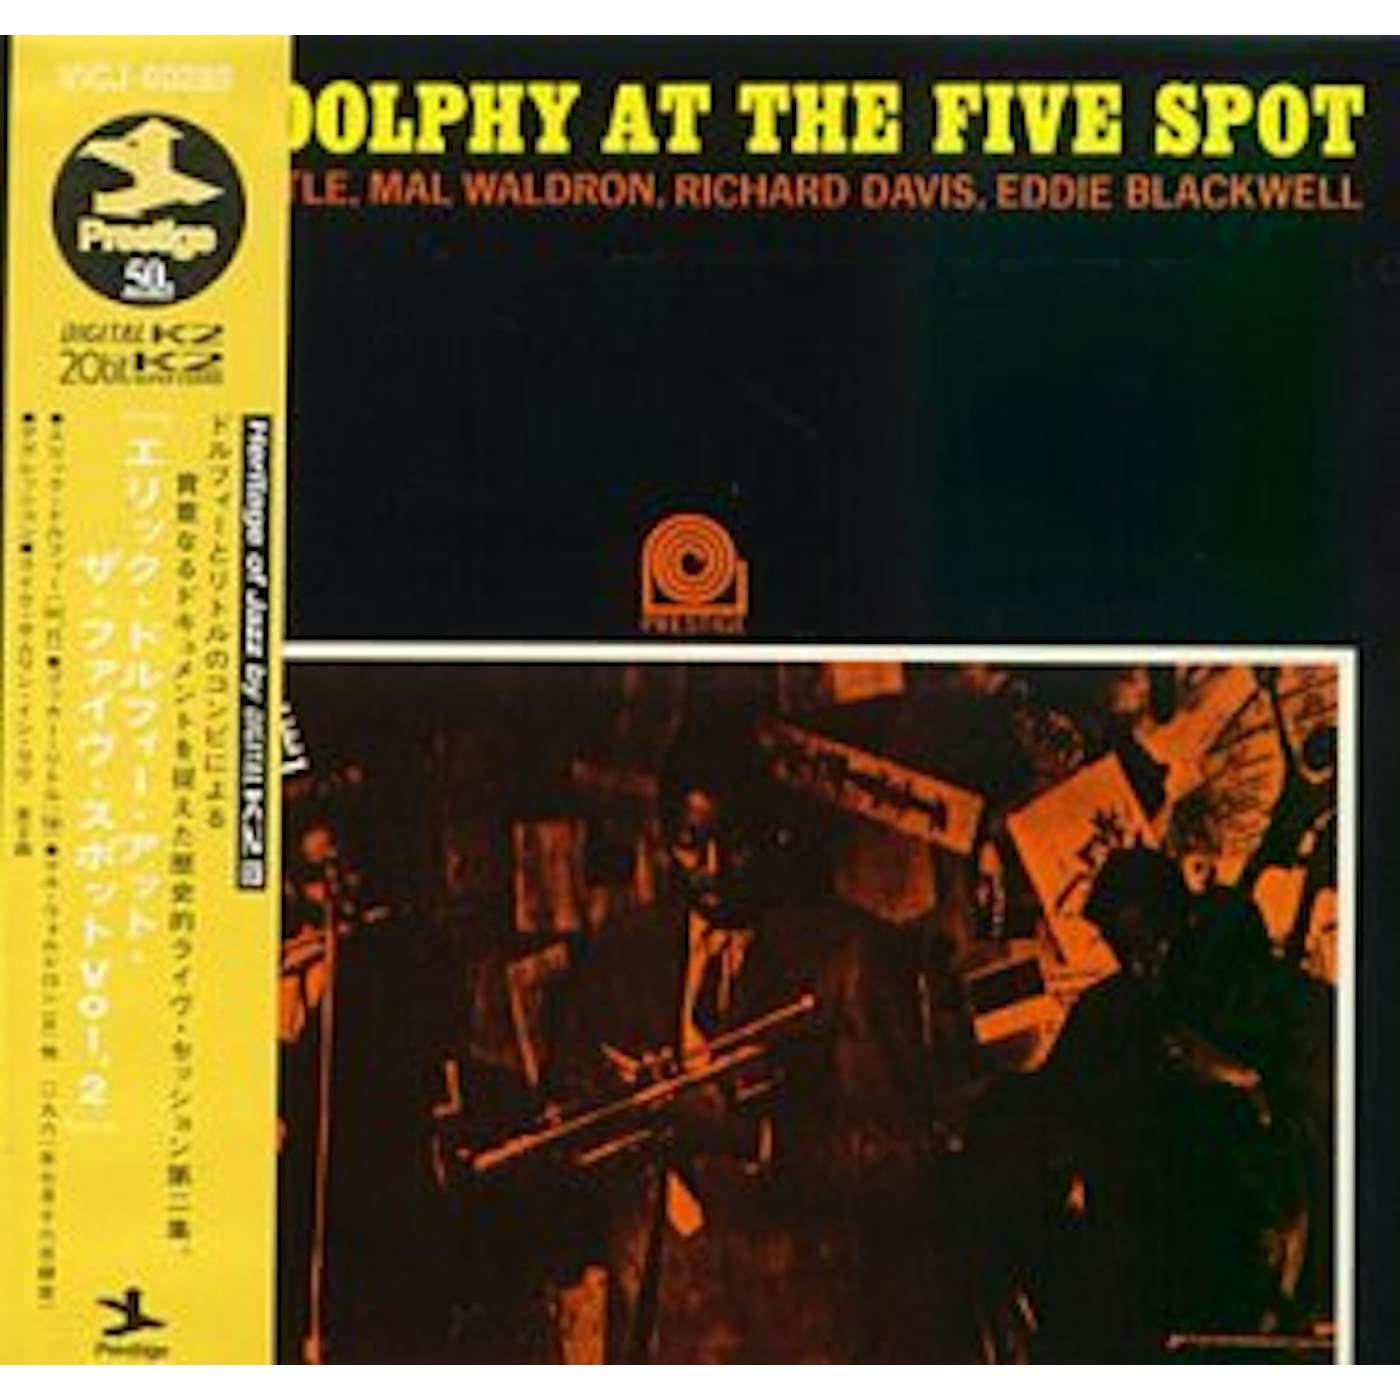 Eric Dolphy AT FIVE SPOT 2 CD